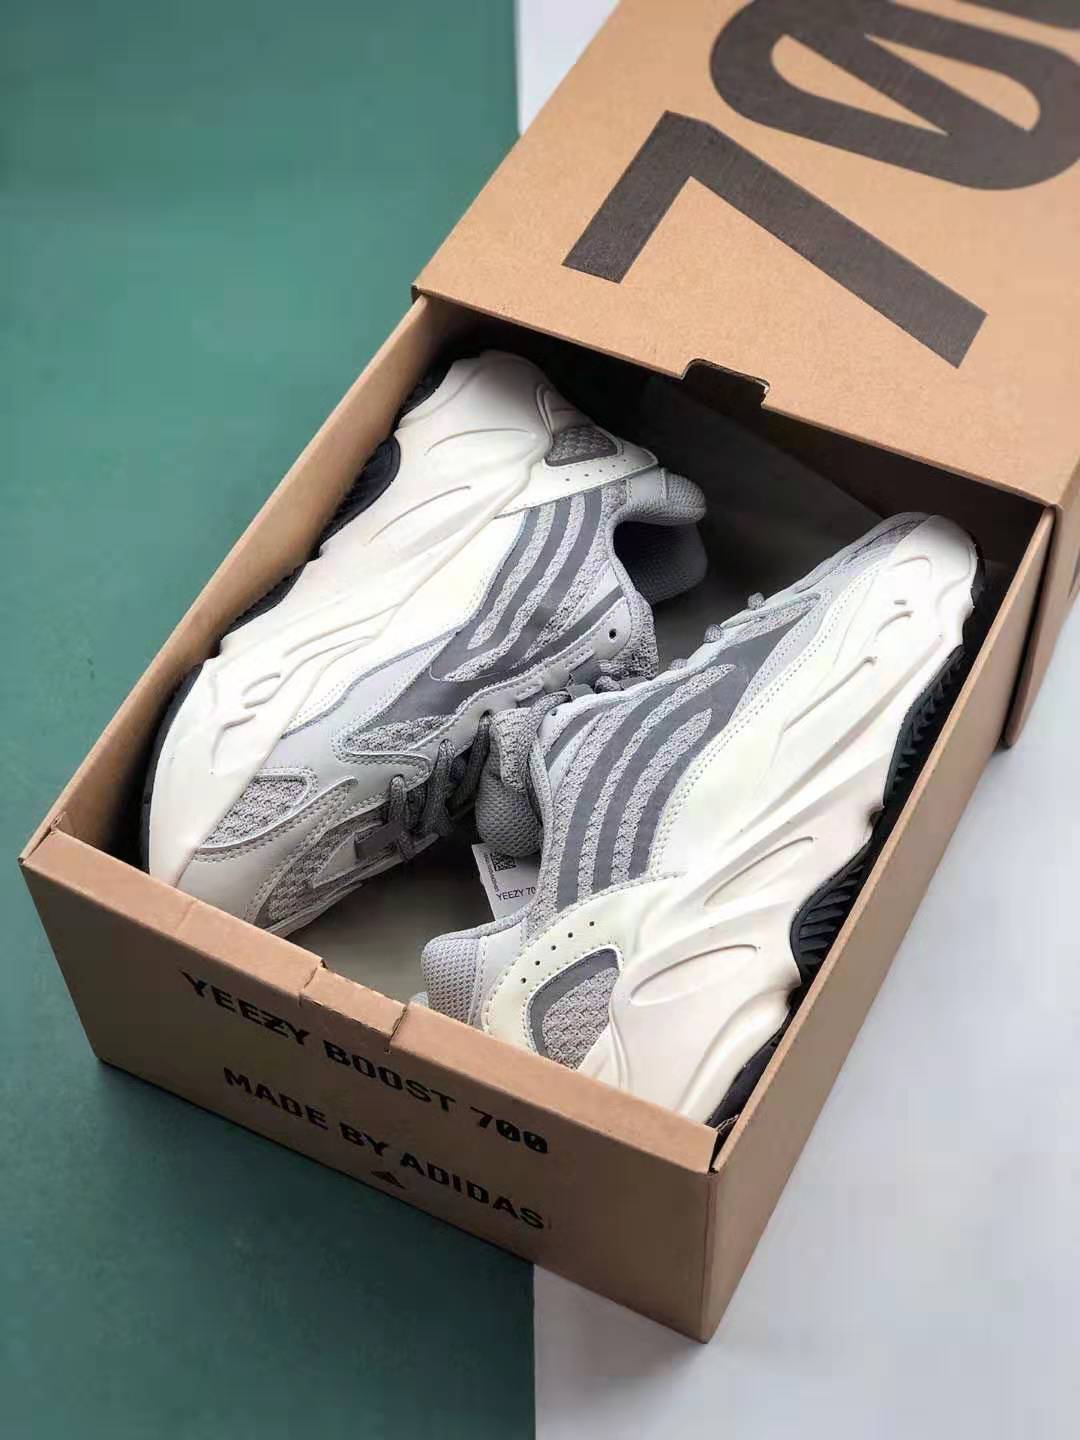 Adidas Yeezy Boost 700V2 Static EF2829 - Shop the Latest Release Today